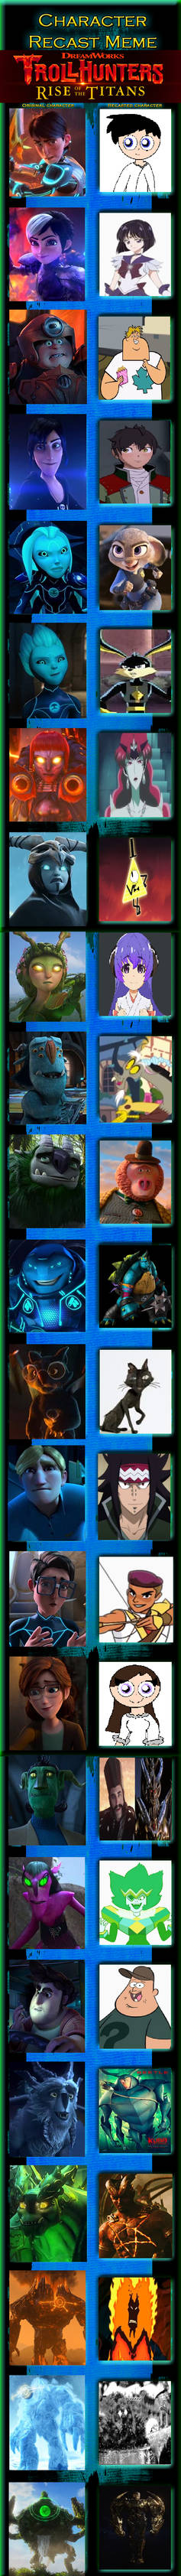 Trollhunters rise of the titans png by Chris2156 on DeviantArt